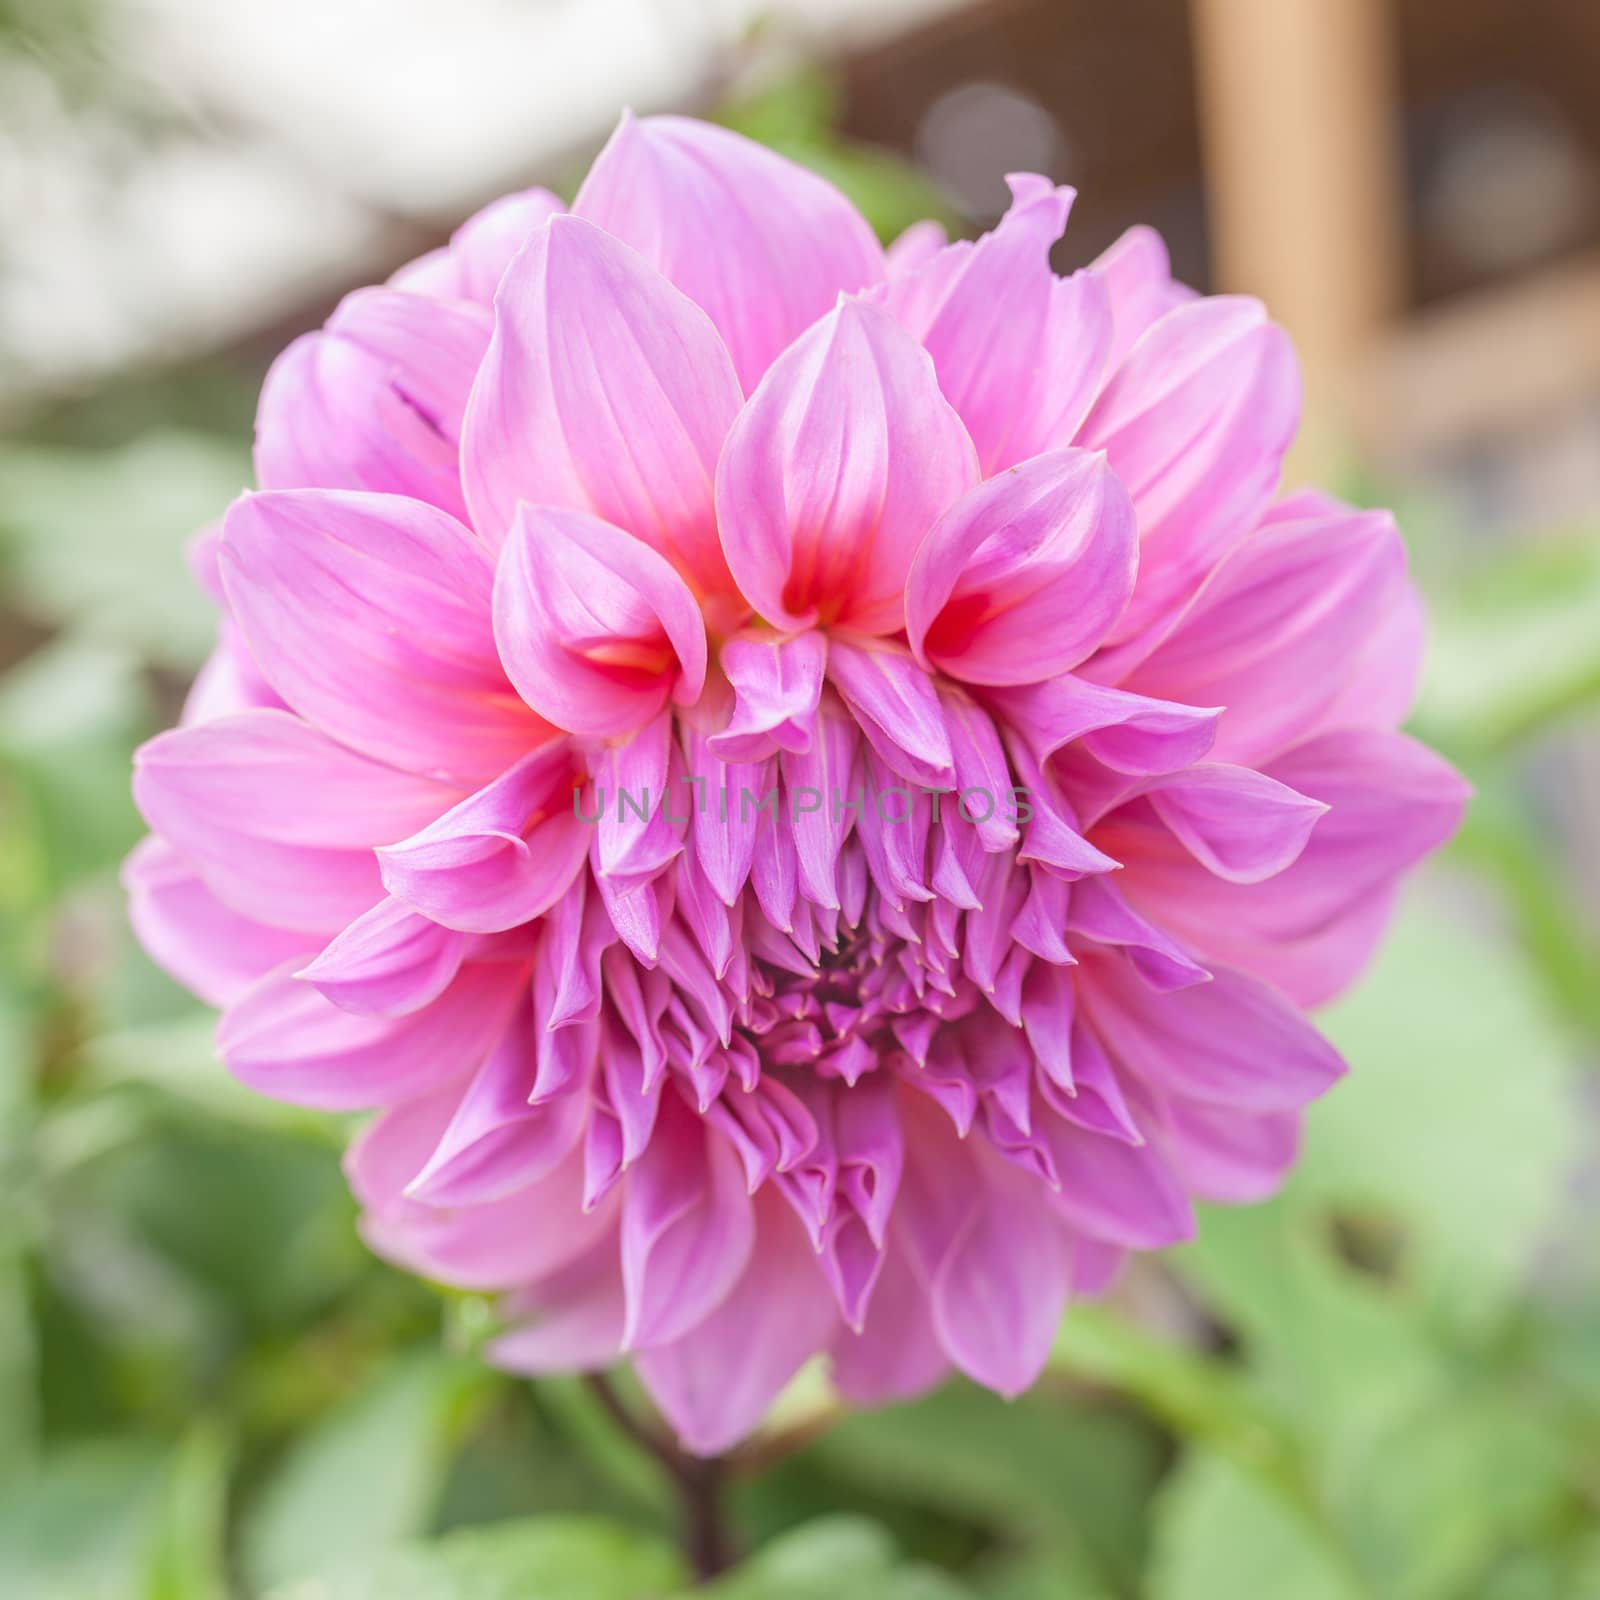 Beautiful Dahlia pink flower on natural green background by nopparats